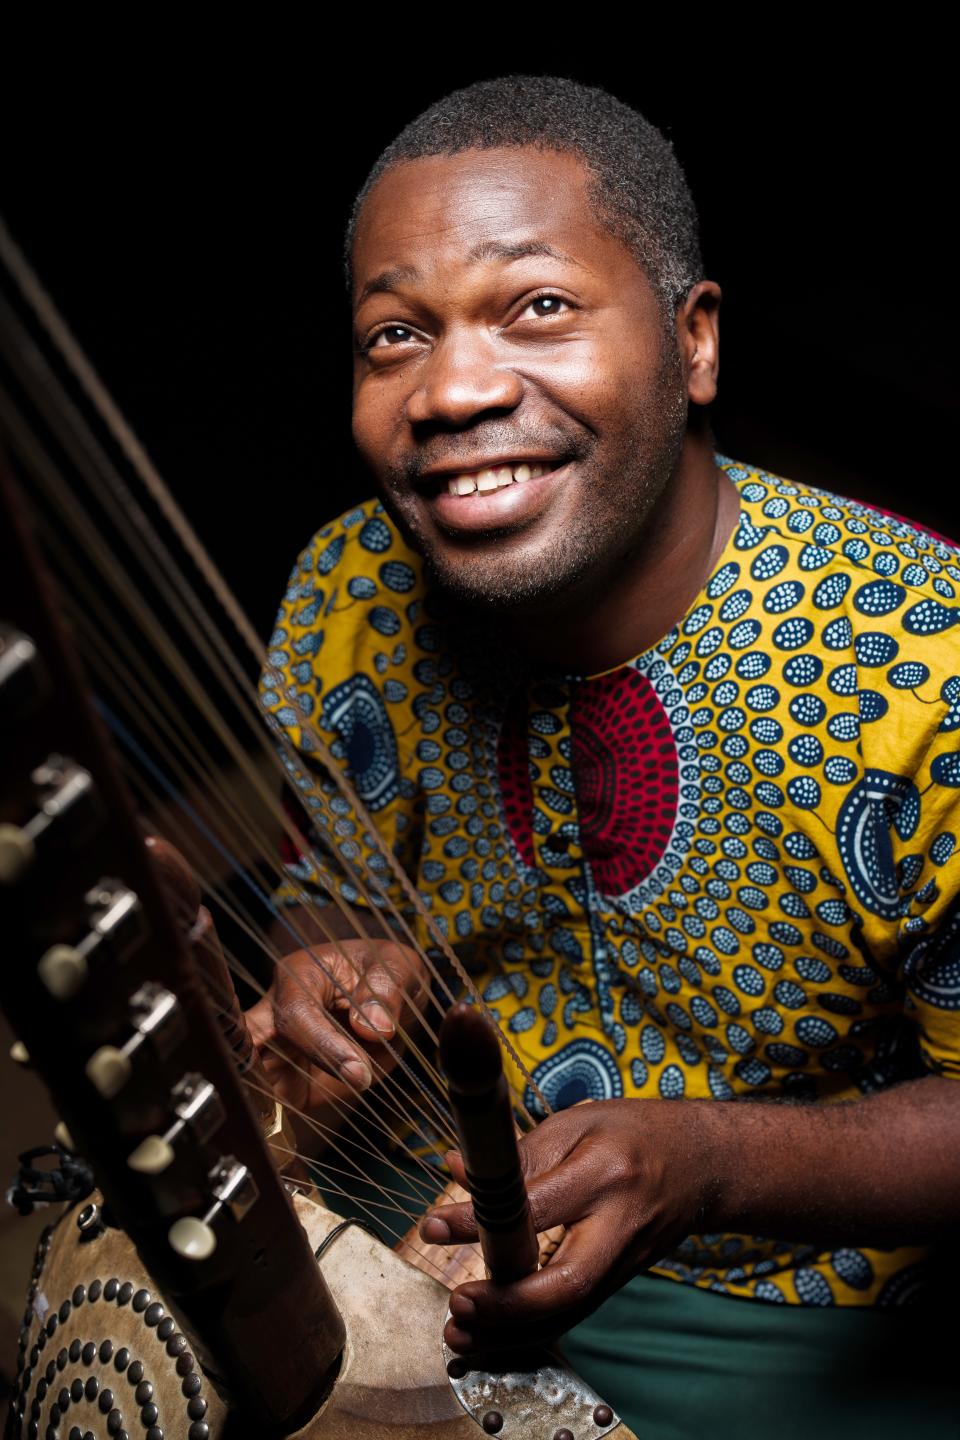 Ugandan musician and educator Chinobay will be the artist in residence for the 2024 Lotus Blossom events in Bloomington. Chinobay will have workshop sessions with area elementary students March 26-29, 2024.